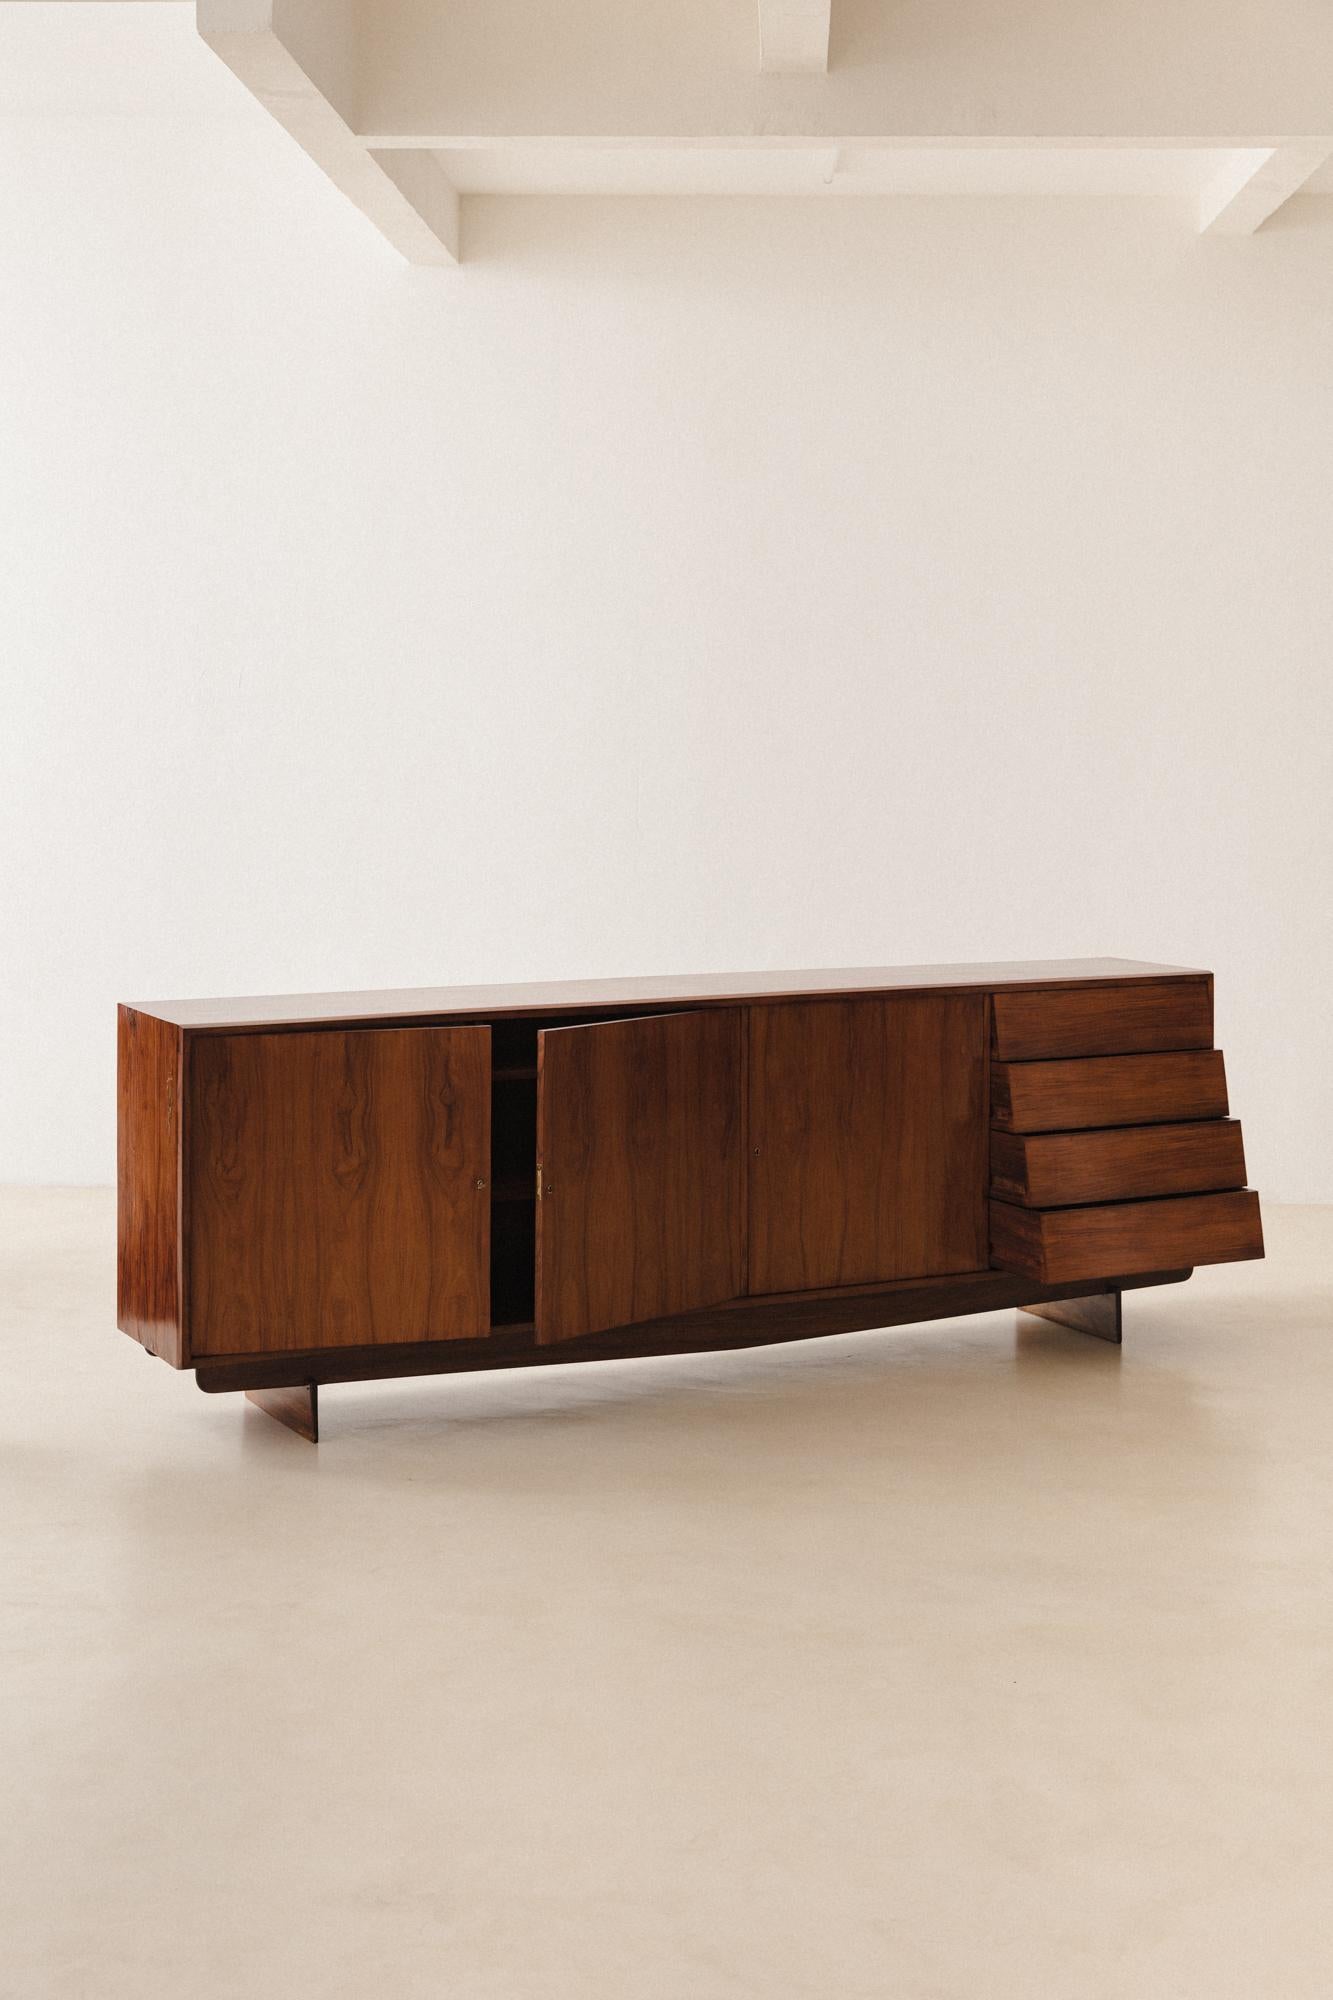 This Caviuna Credenza was designed by Martin Eisler (1913-1977) for Forma S.A. Móveis e Objetos de Arte in the 1950s.

This furniture typology was very common at the period, appearing in several interior projects published in the most known design